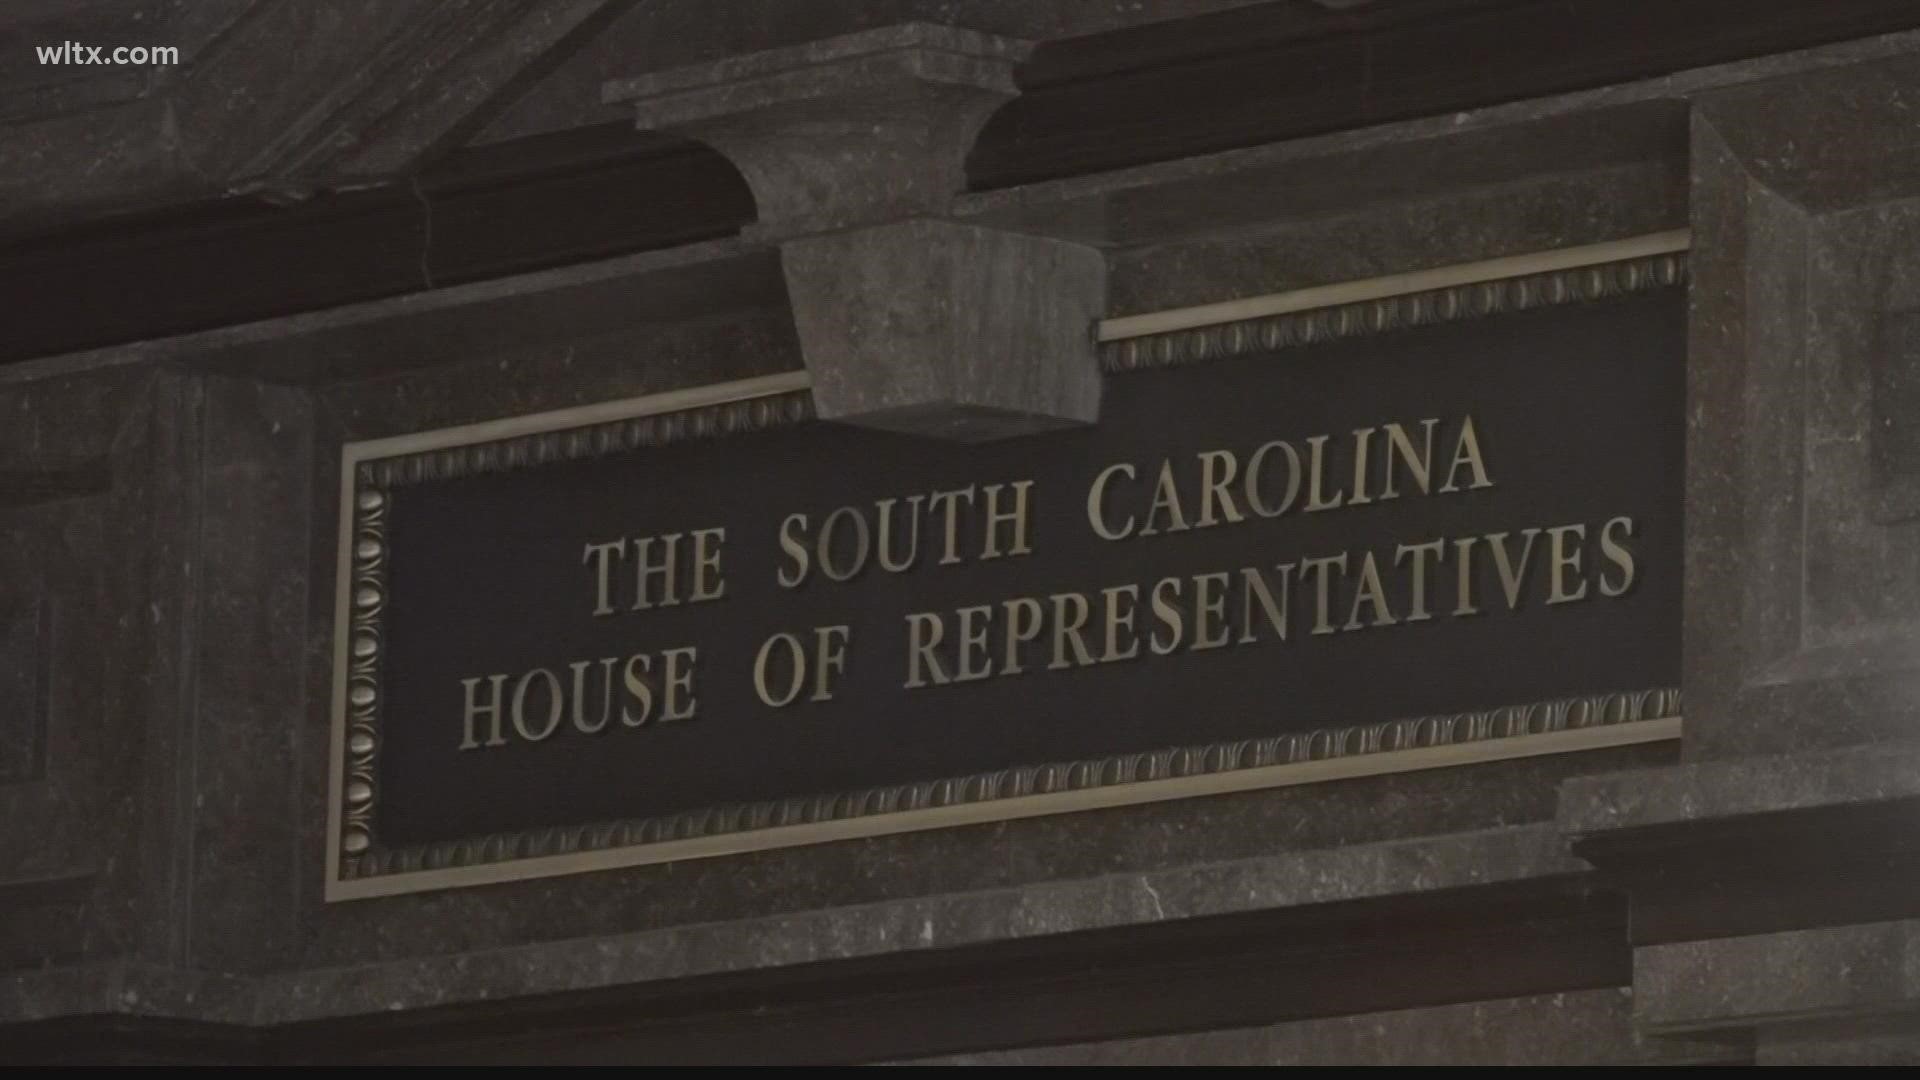 In a senate committee meeting Tuesday, Senators discussed changes to the way South Carolina conducts its elections.